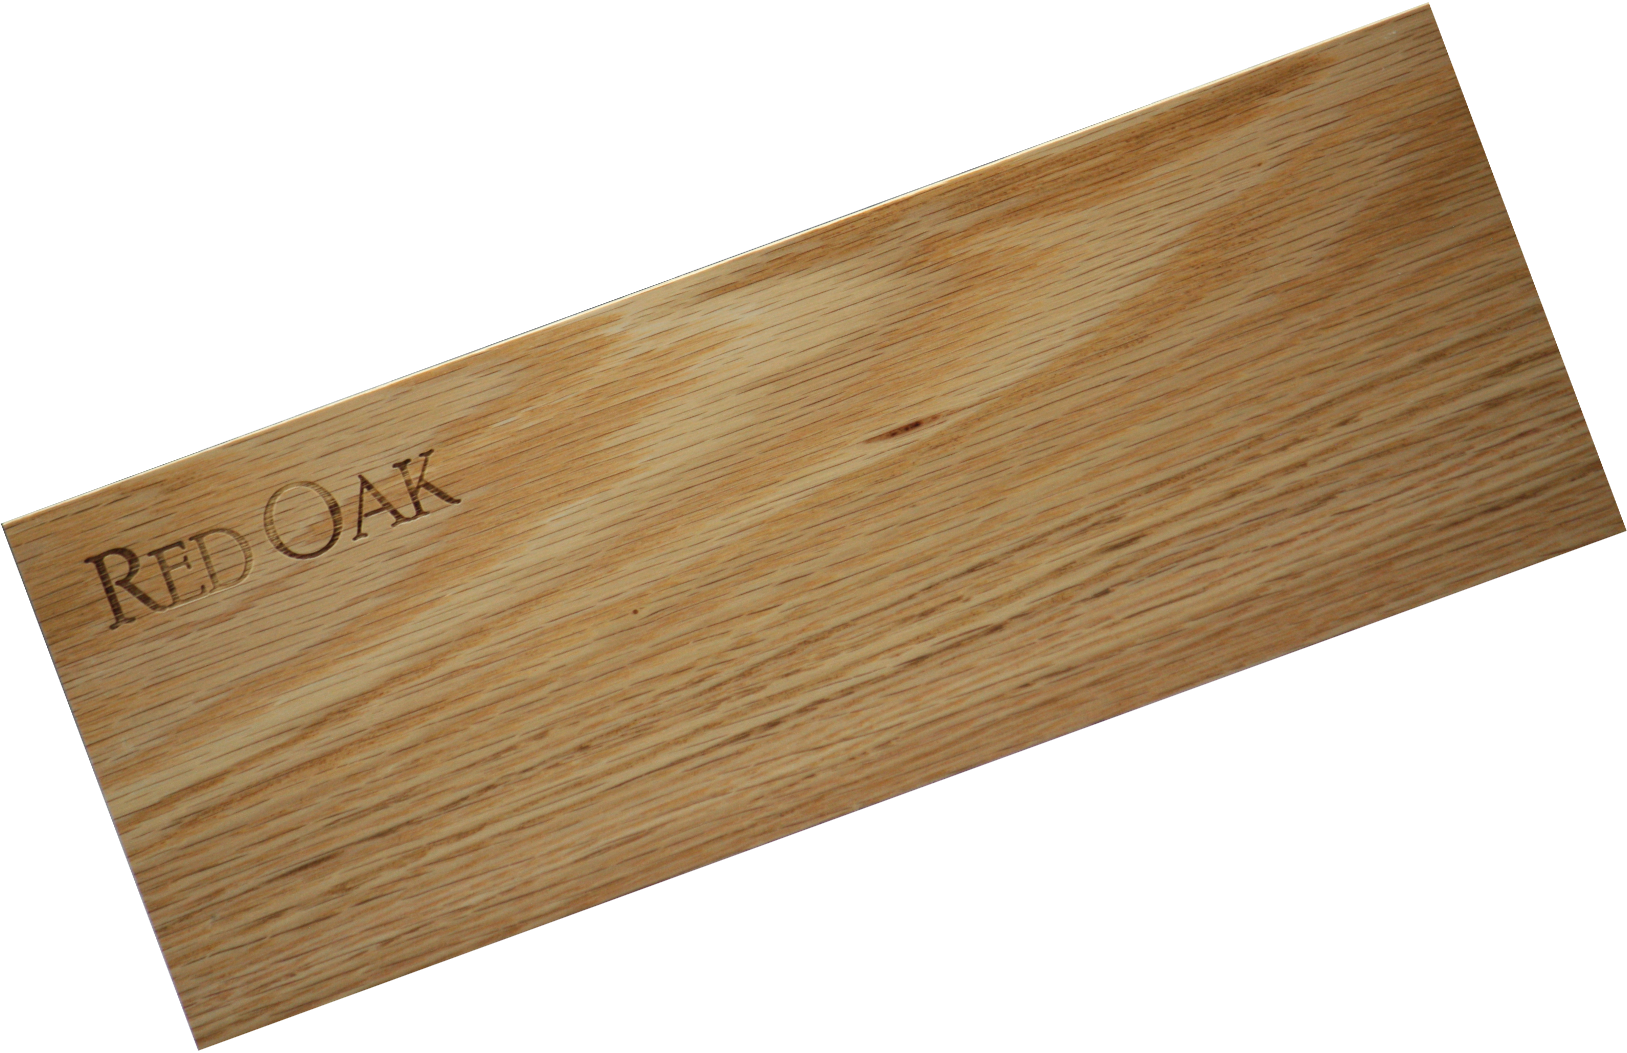 Wood Strip (Red Oak / Hickory) 4.5" x 14.5" x  (1/16", 3/32", 1/8", 3/16" or 1/4") 